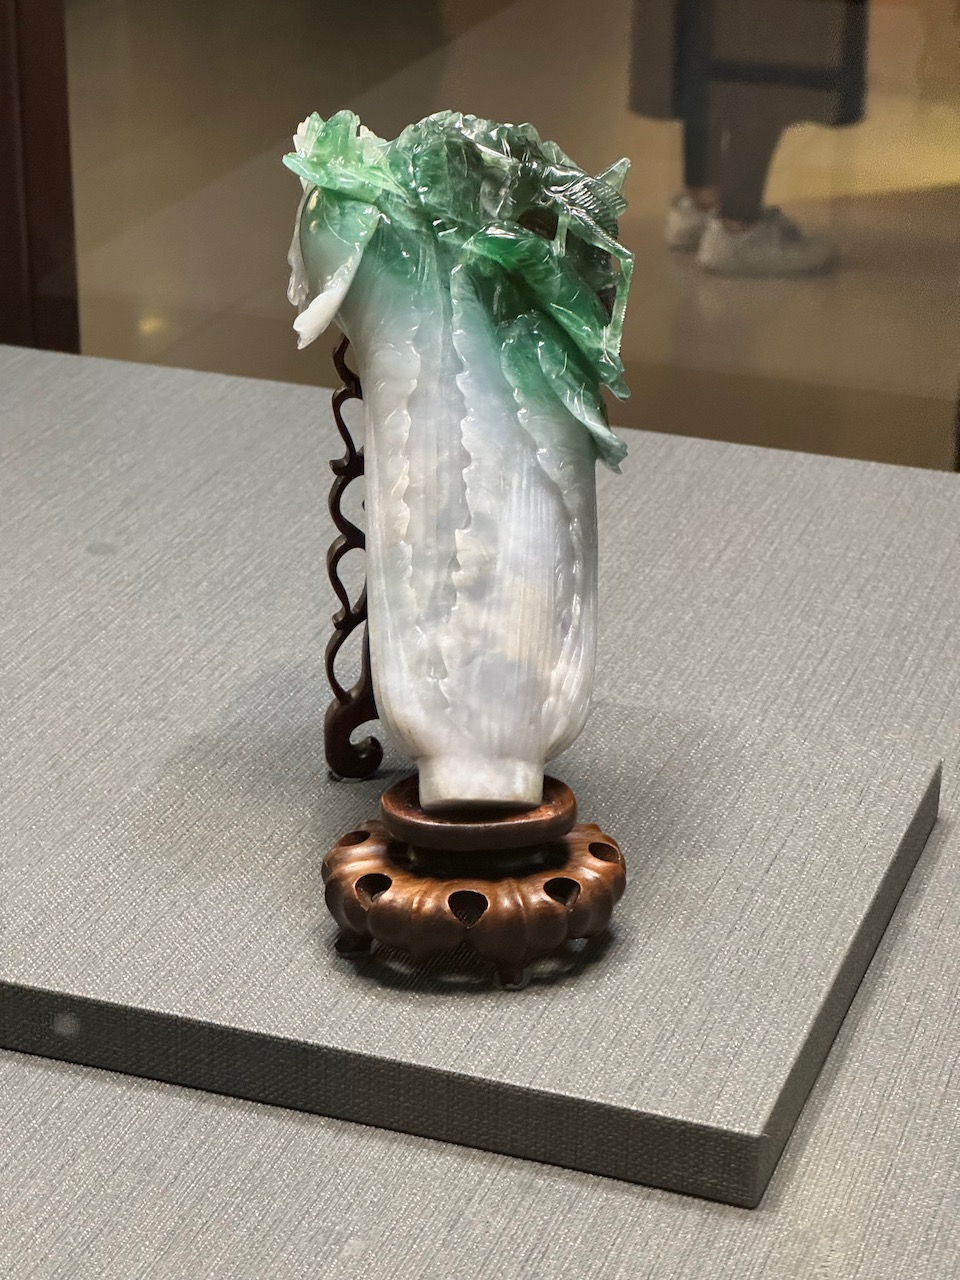 Jade cabbage in the National palace museum